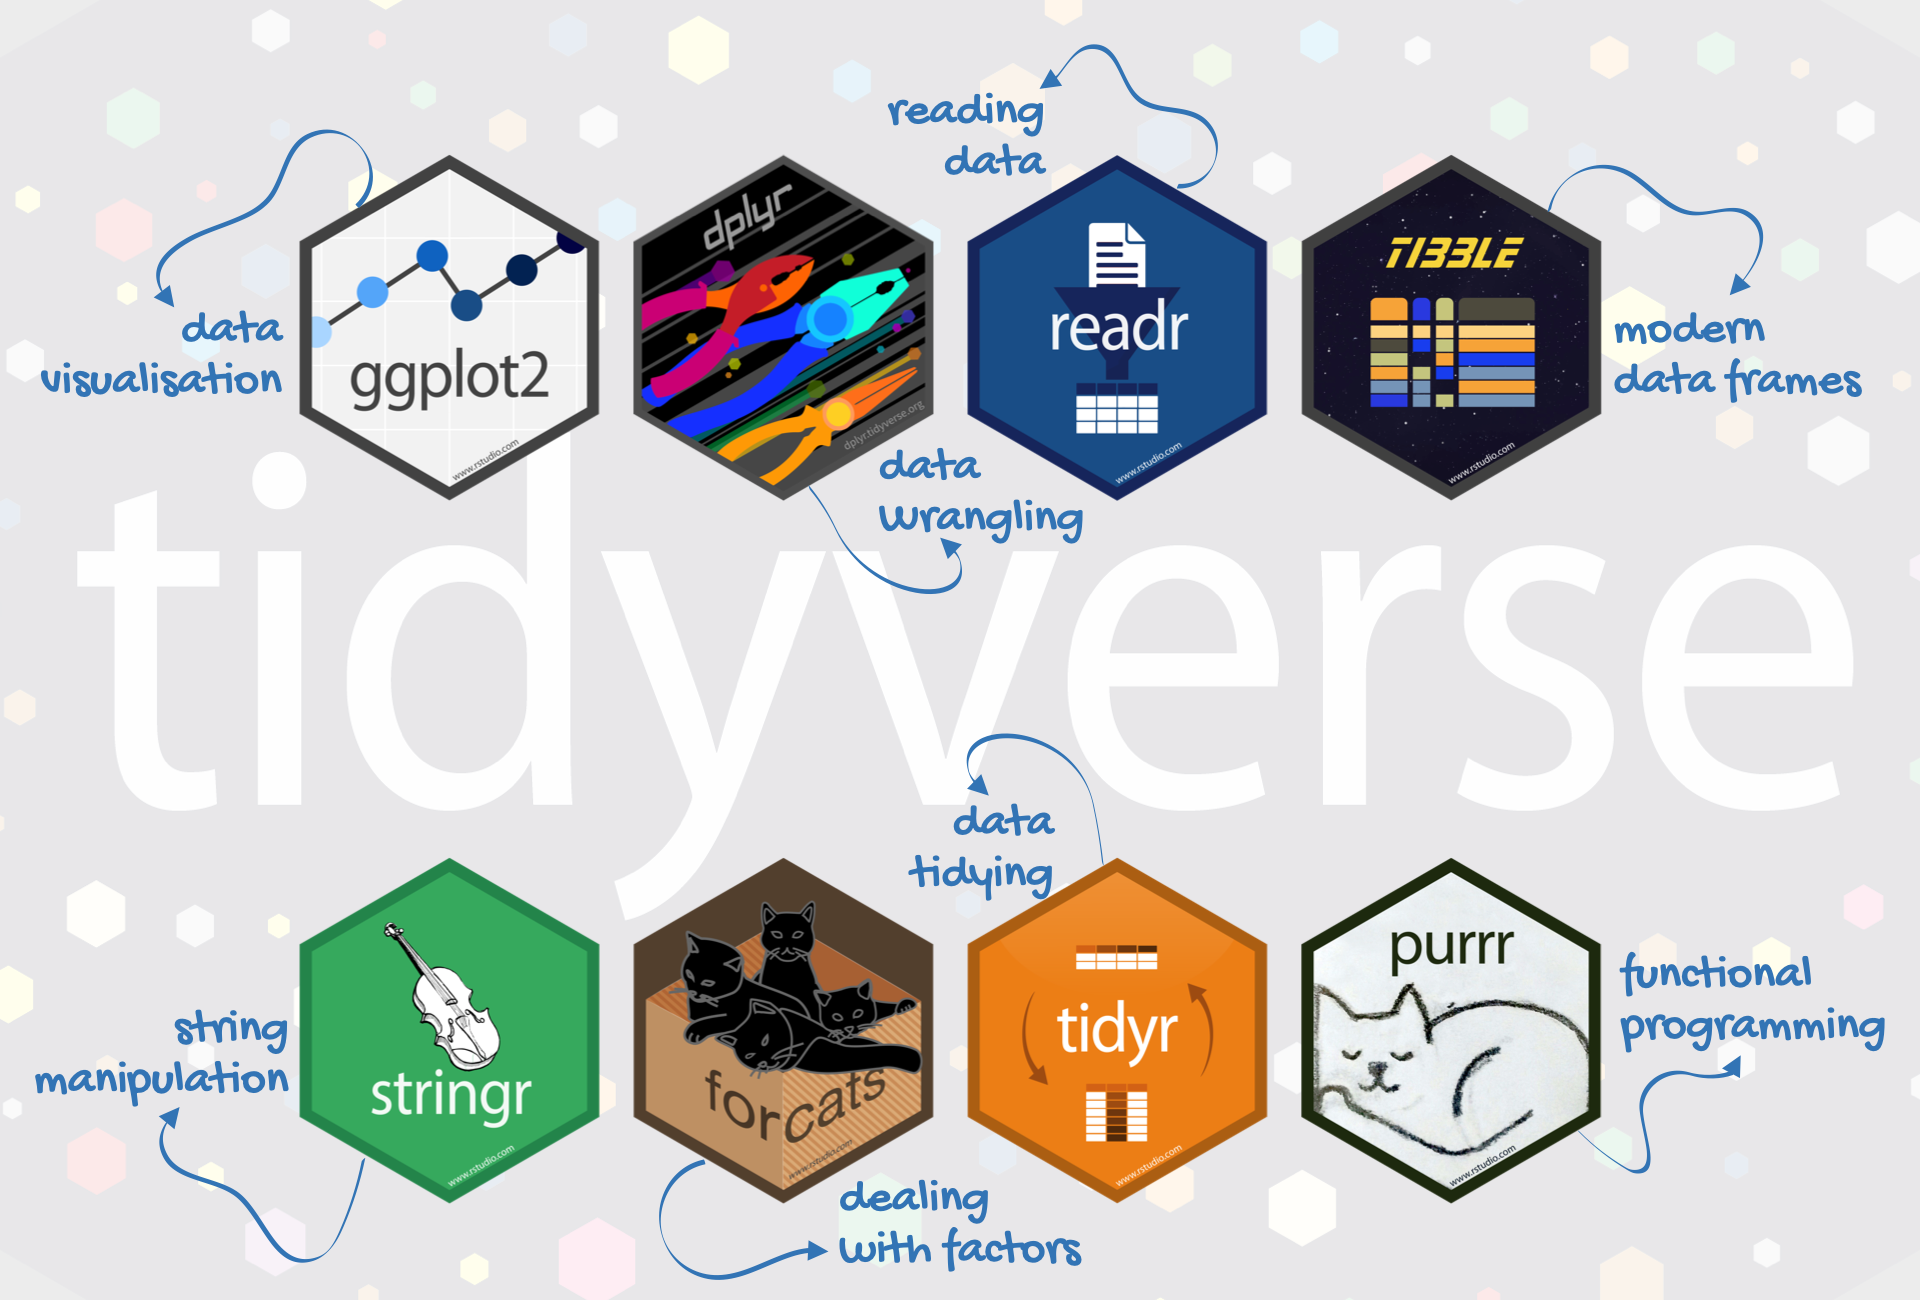 an illustration of eight hexagons with the names of the tidyverse core packages inside, dplyr, readr, purrr, tidyverse, ggplot2, tidyr, and tibble